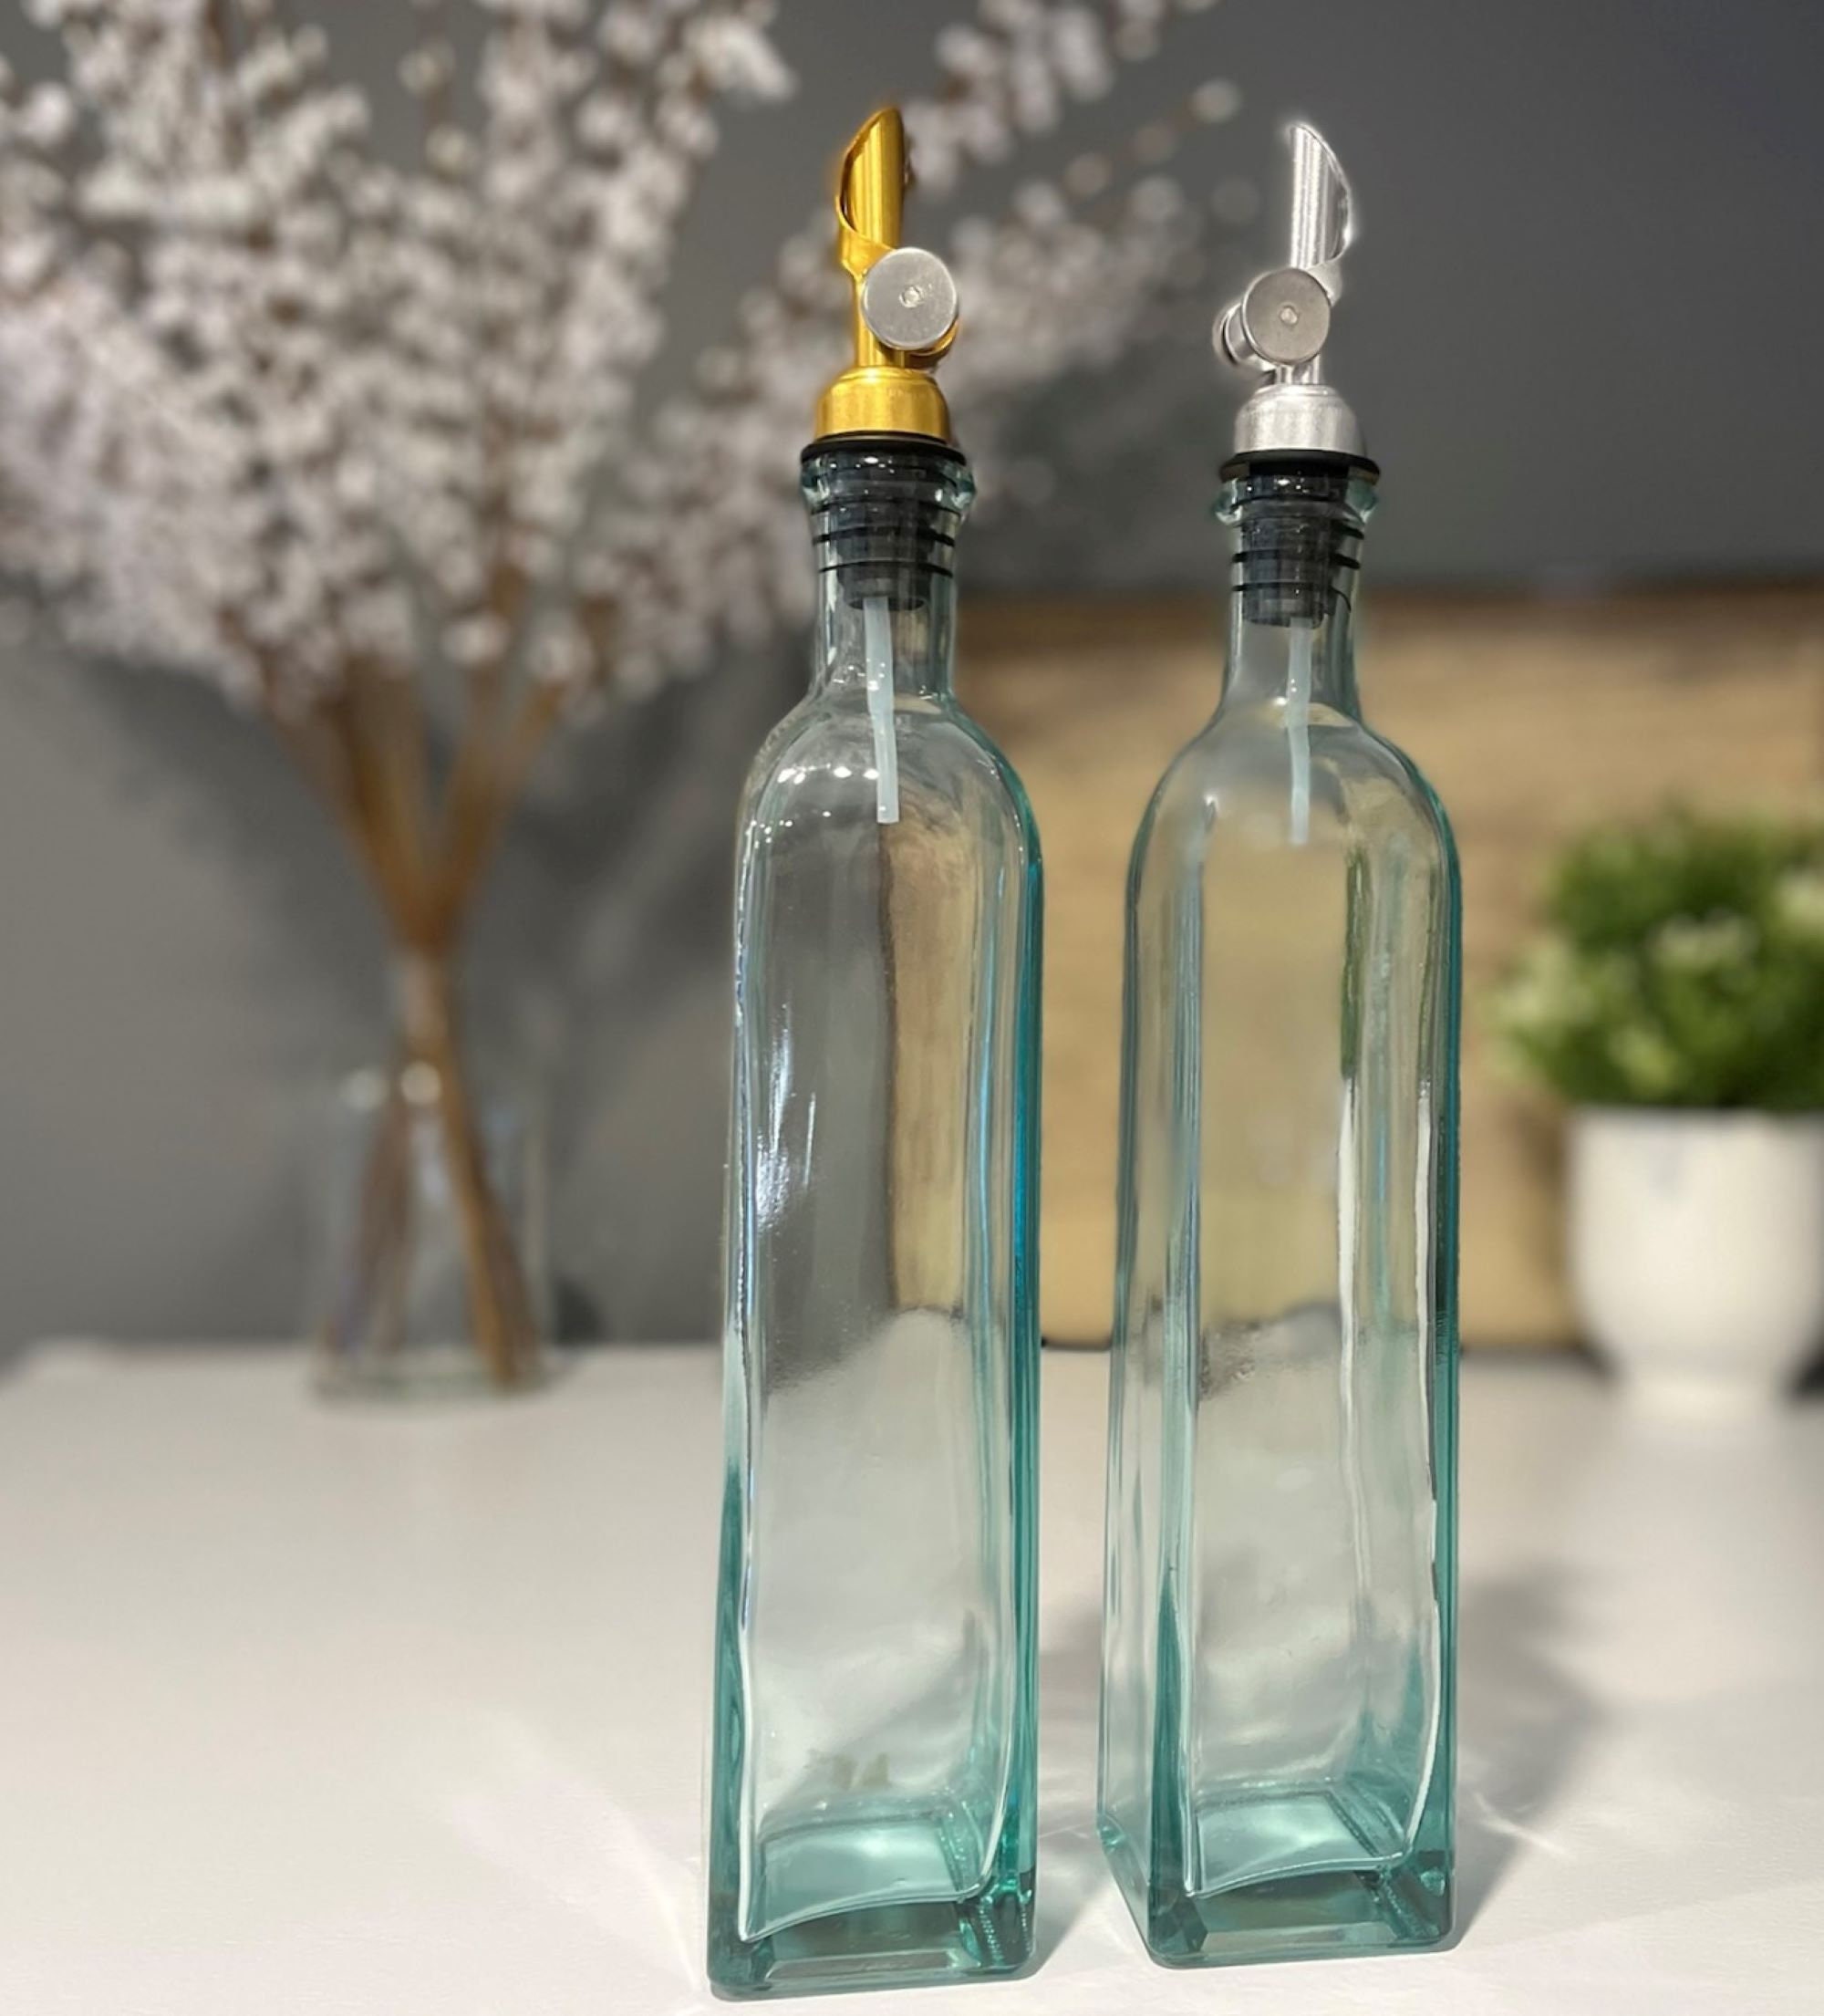 Apothecary Glass Bottles With Weighted Pour Spouts Variety photo